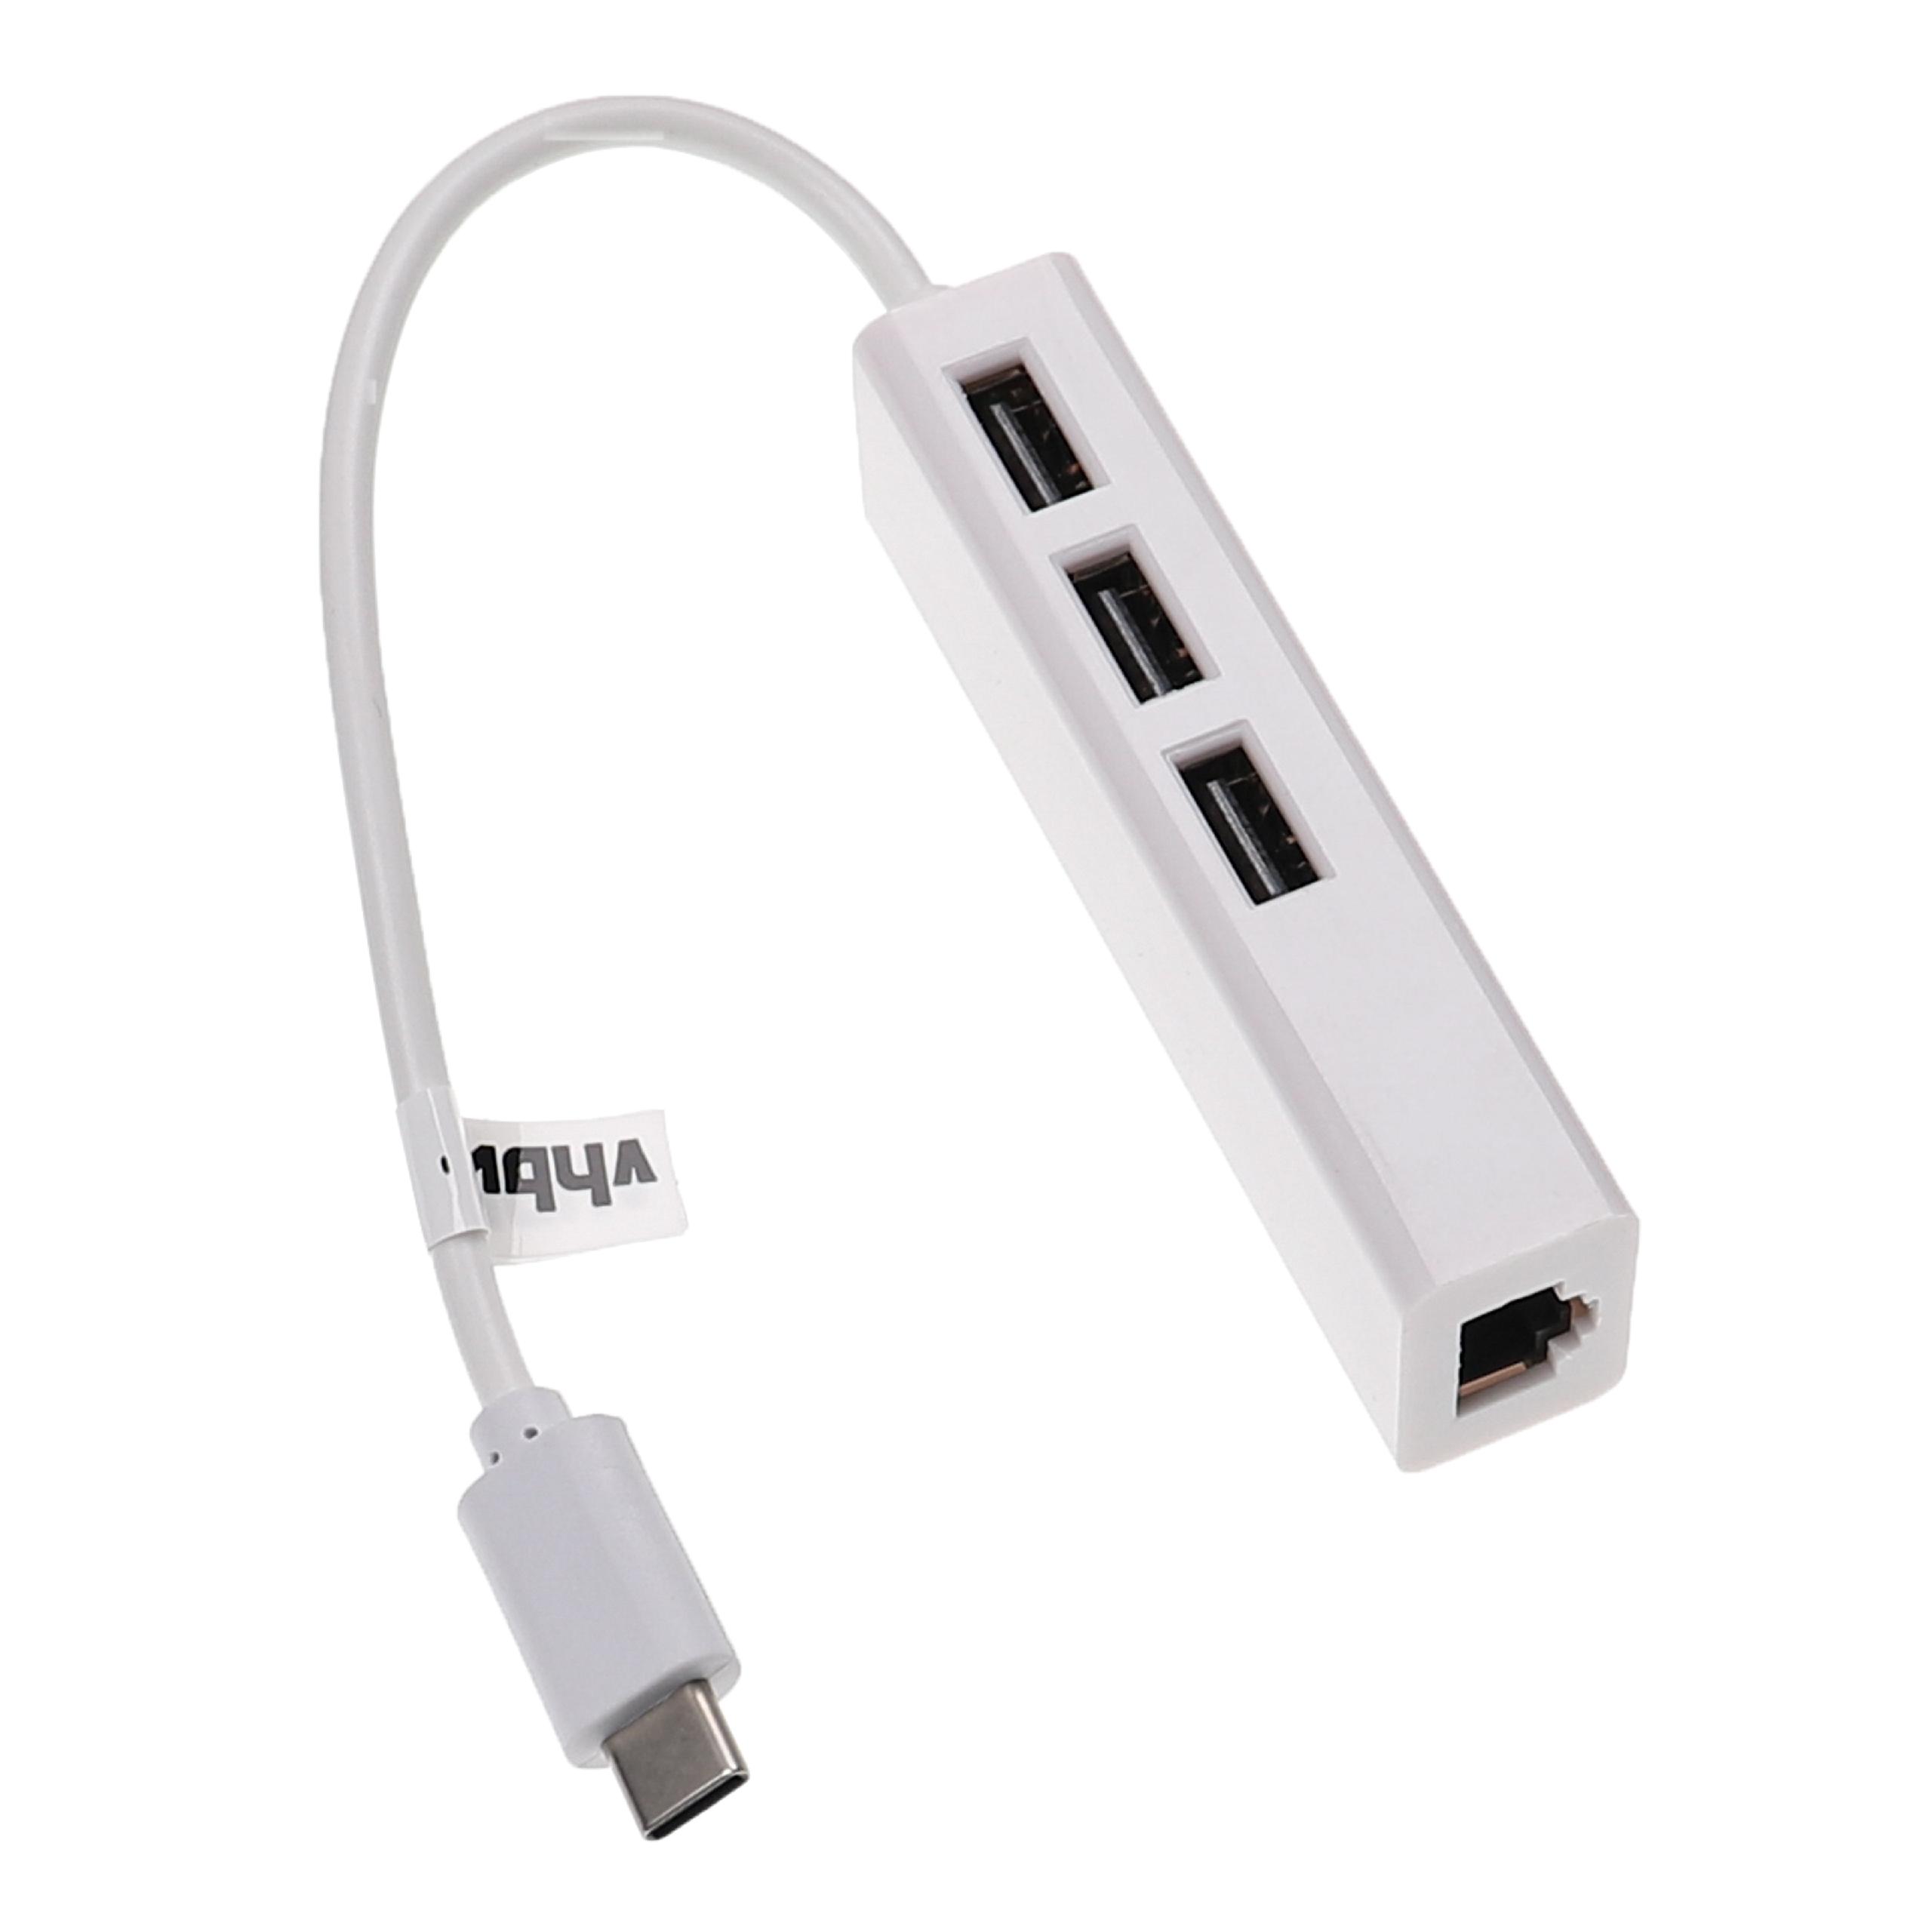 USBC (m) to RJ45 (f) Ethernet Adapter for Laptop, Notebook, PC + 3 Additional USB A Sockets